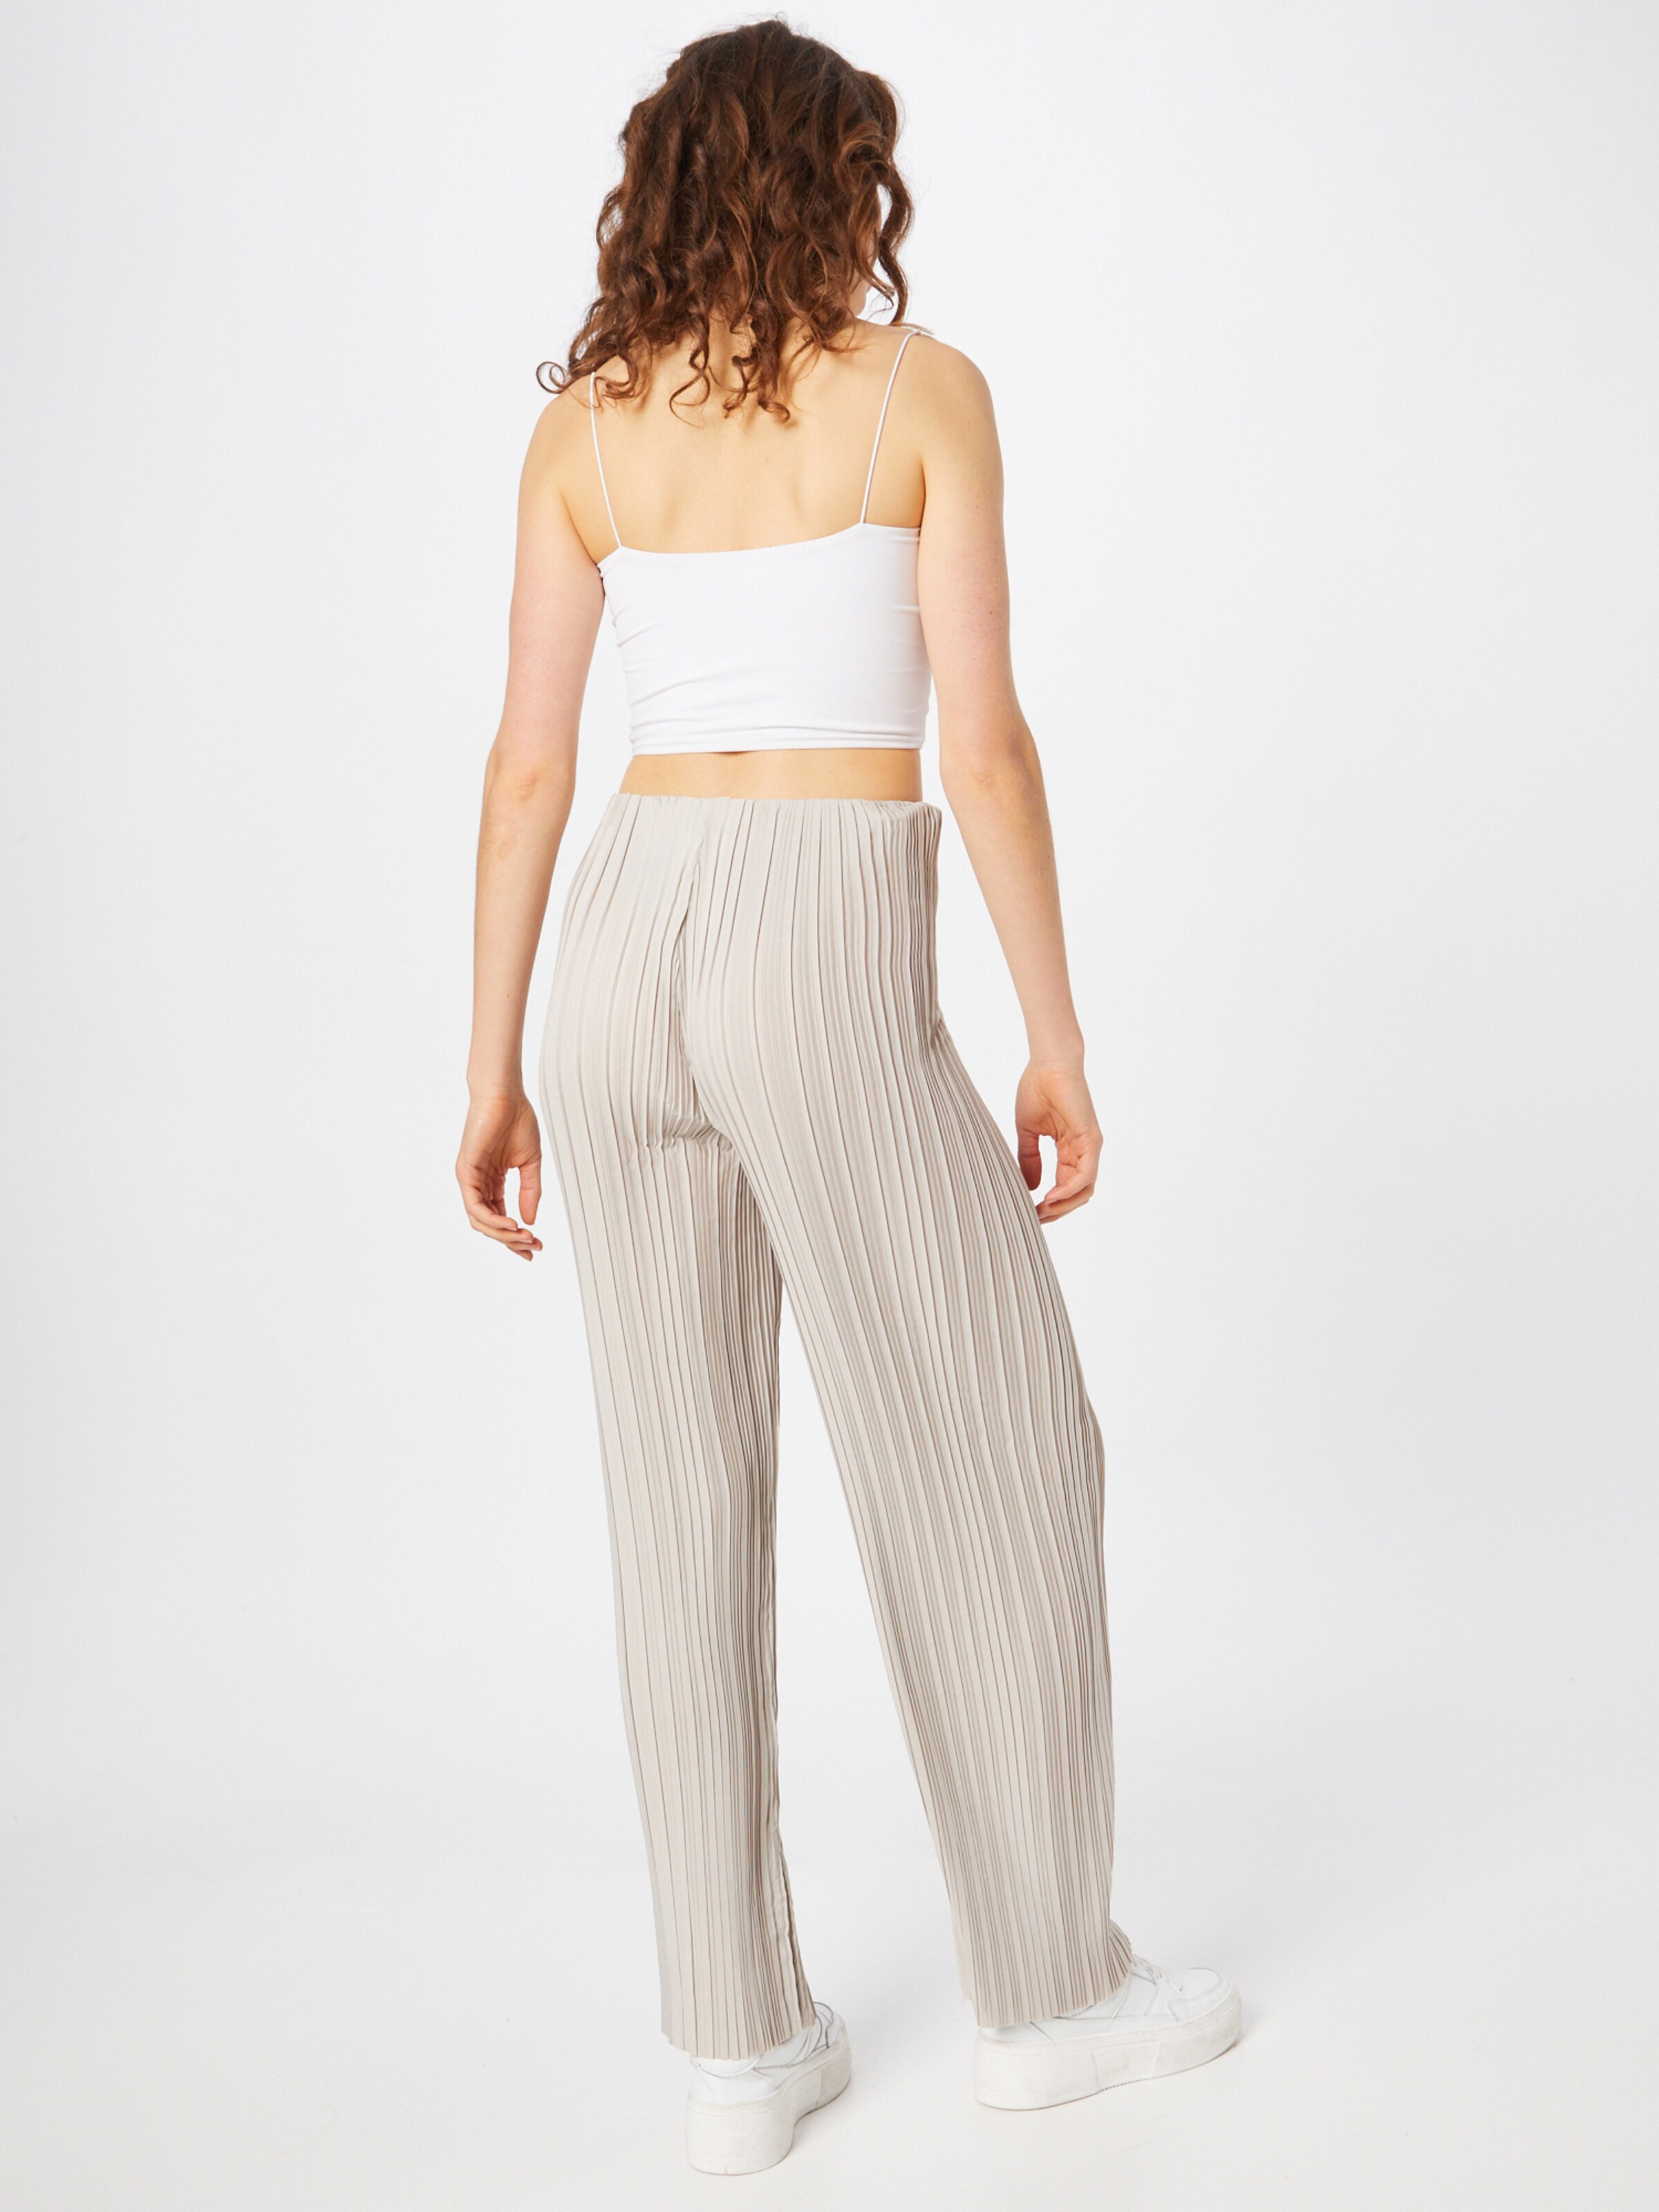 Gina Tricot Hose Acra in Silber 